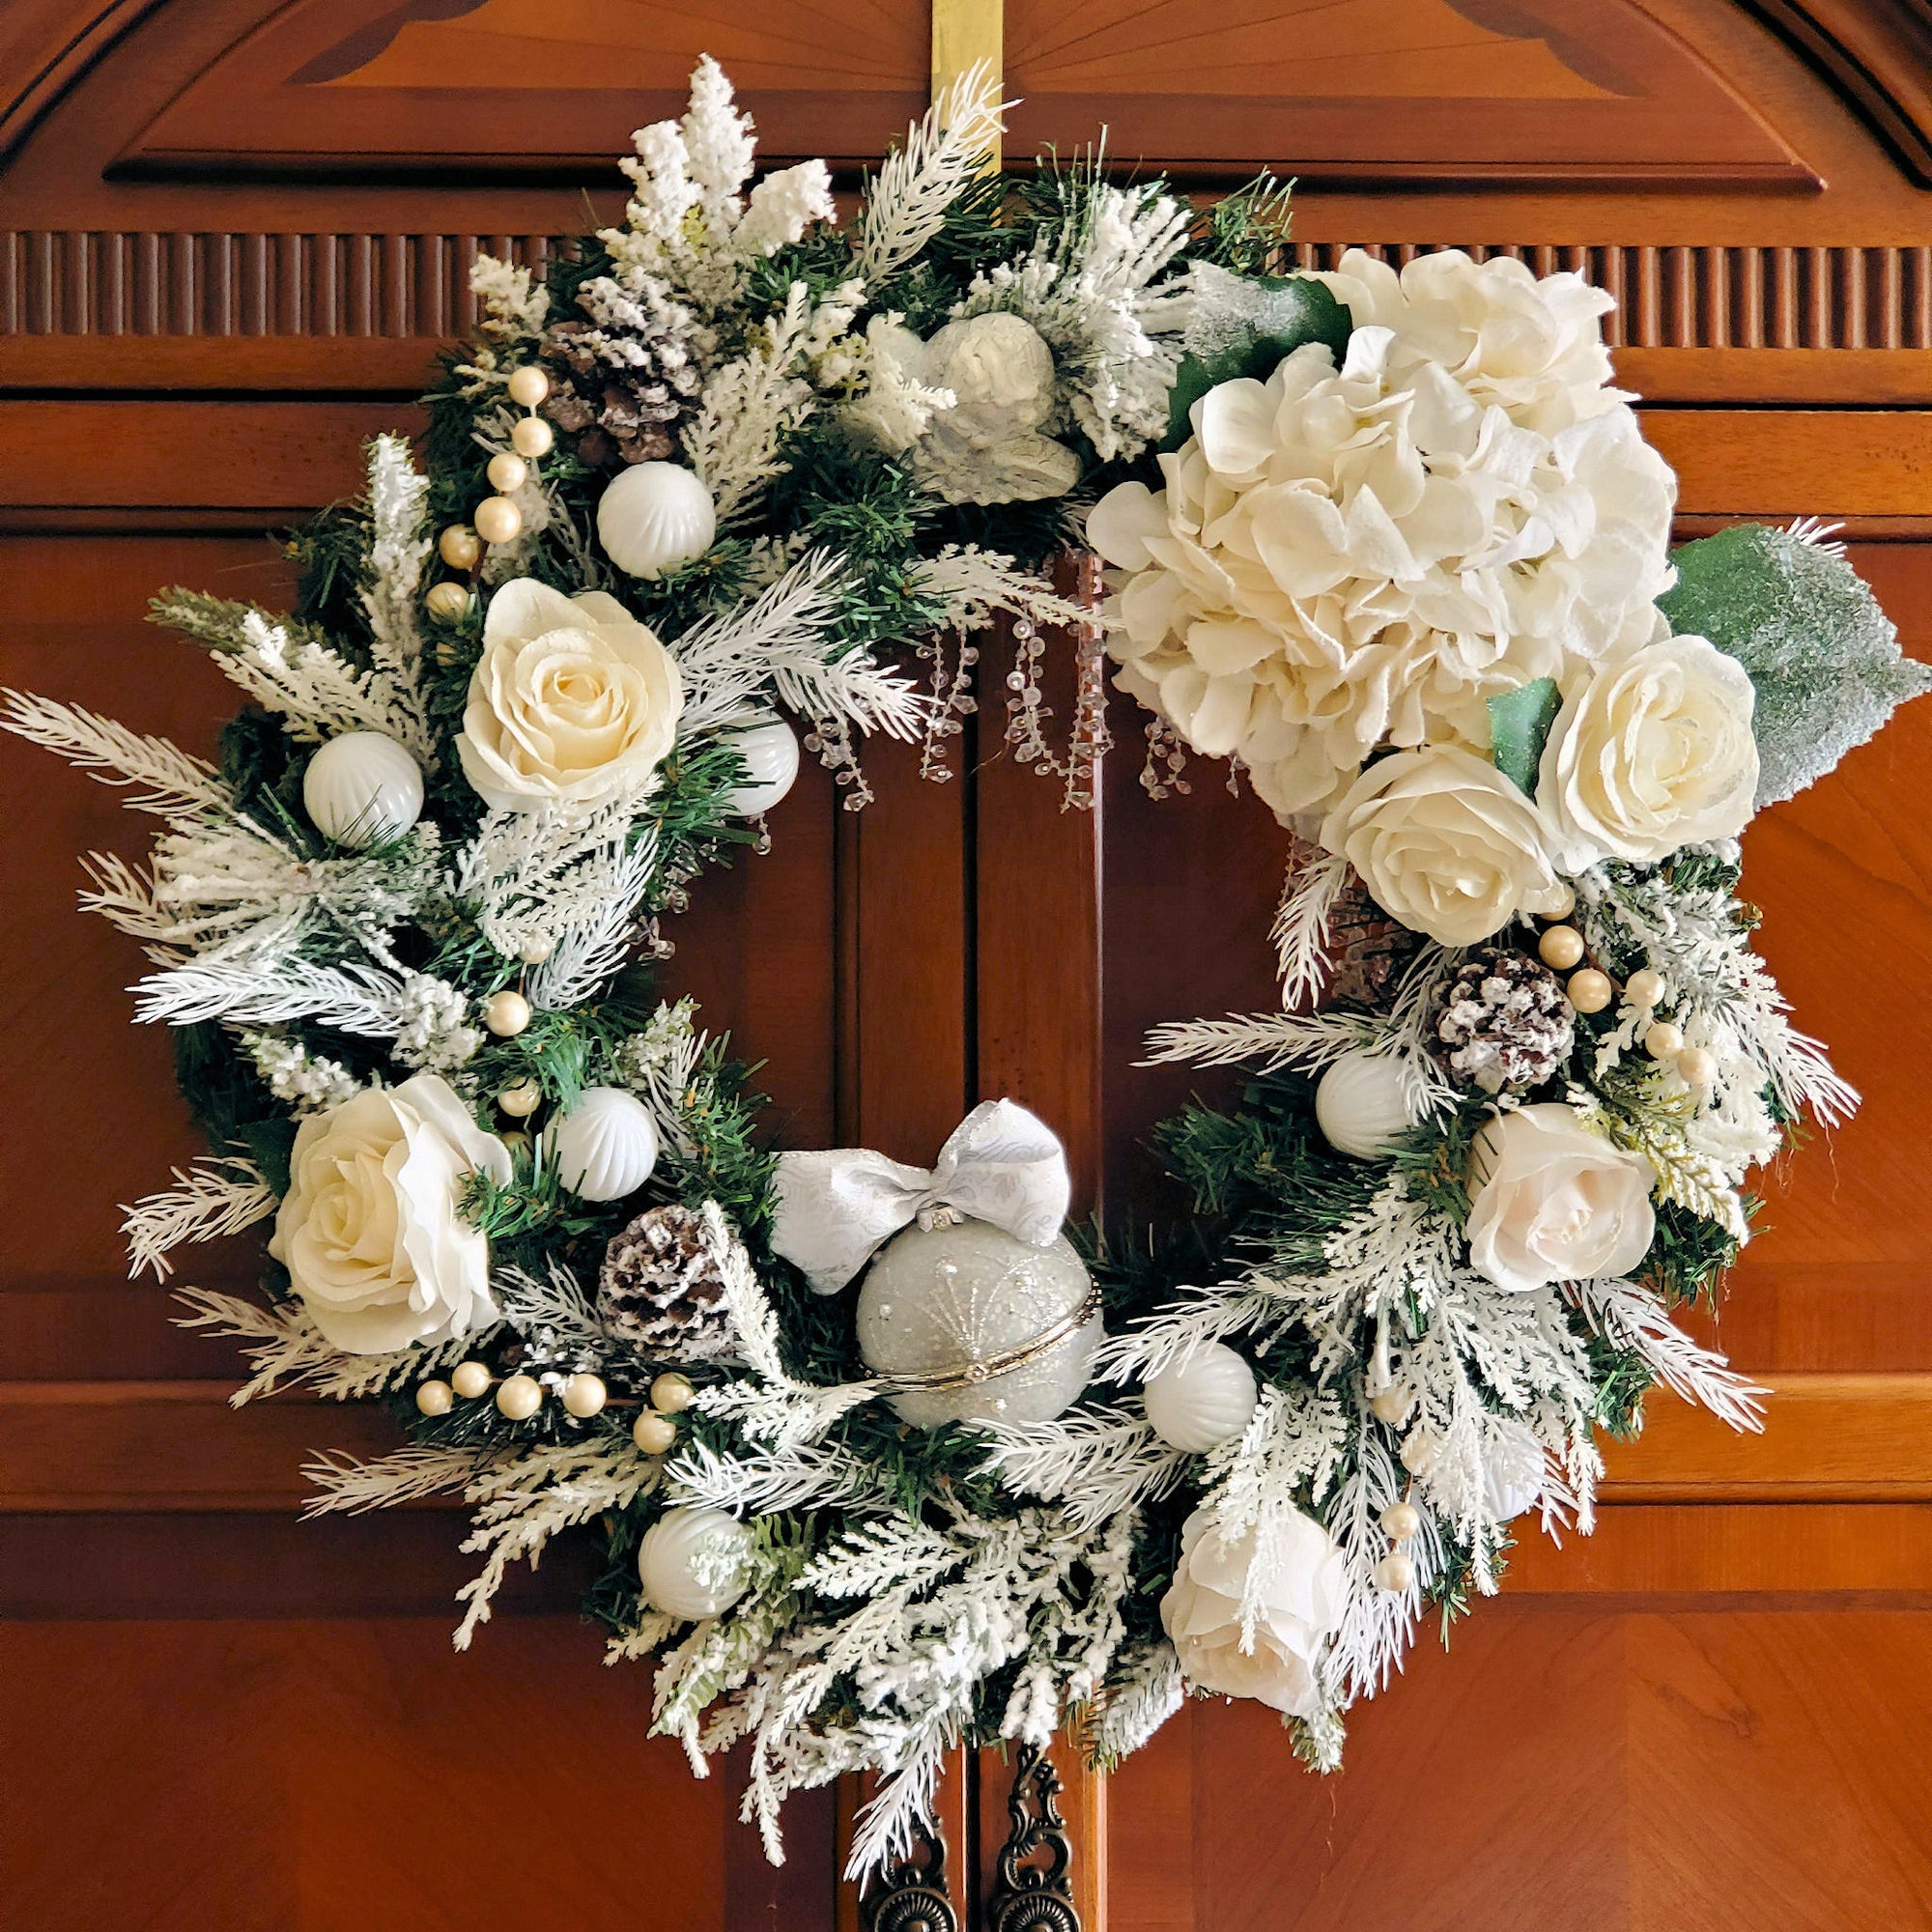 White Pine Branches, White Pearl Berries and Snow  Dusted Pinecones decorate the wreath.